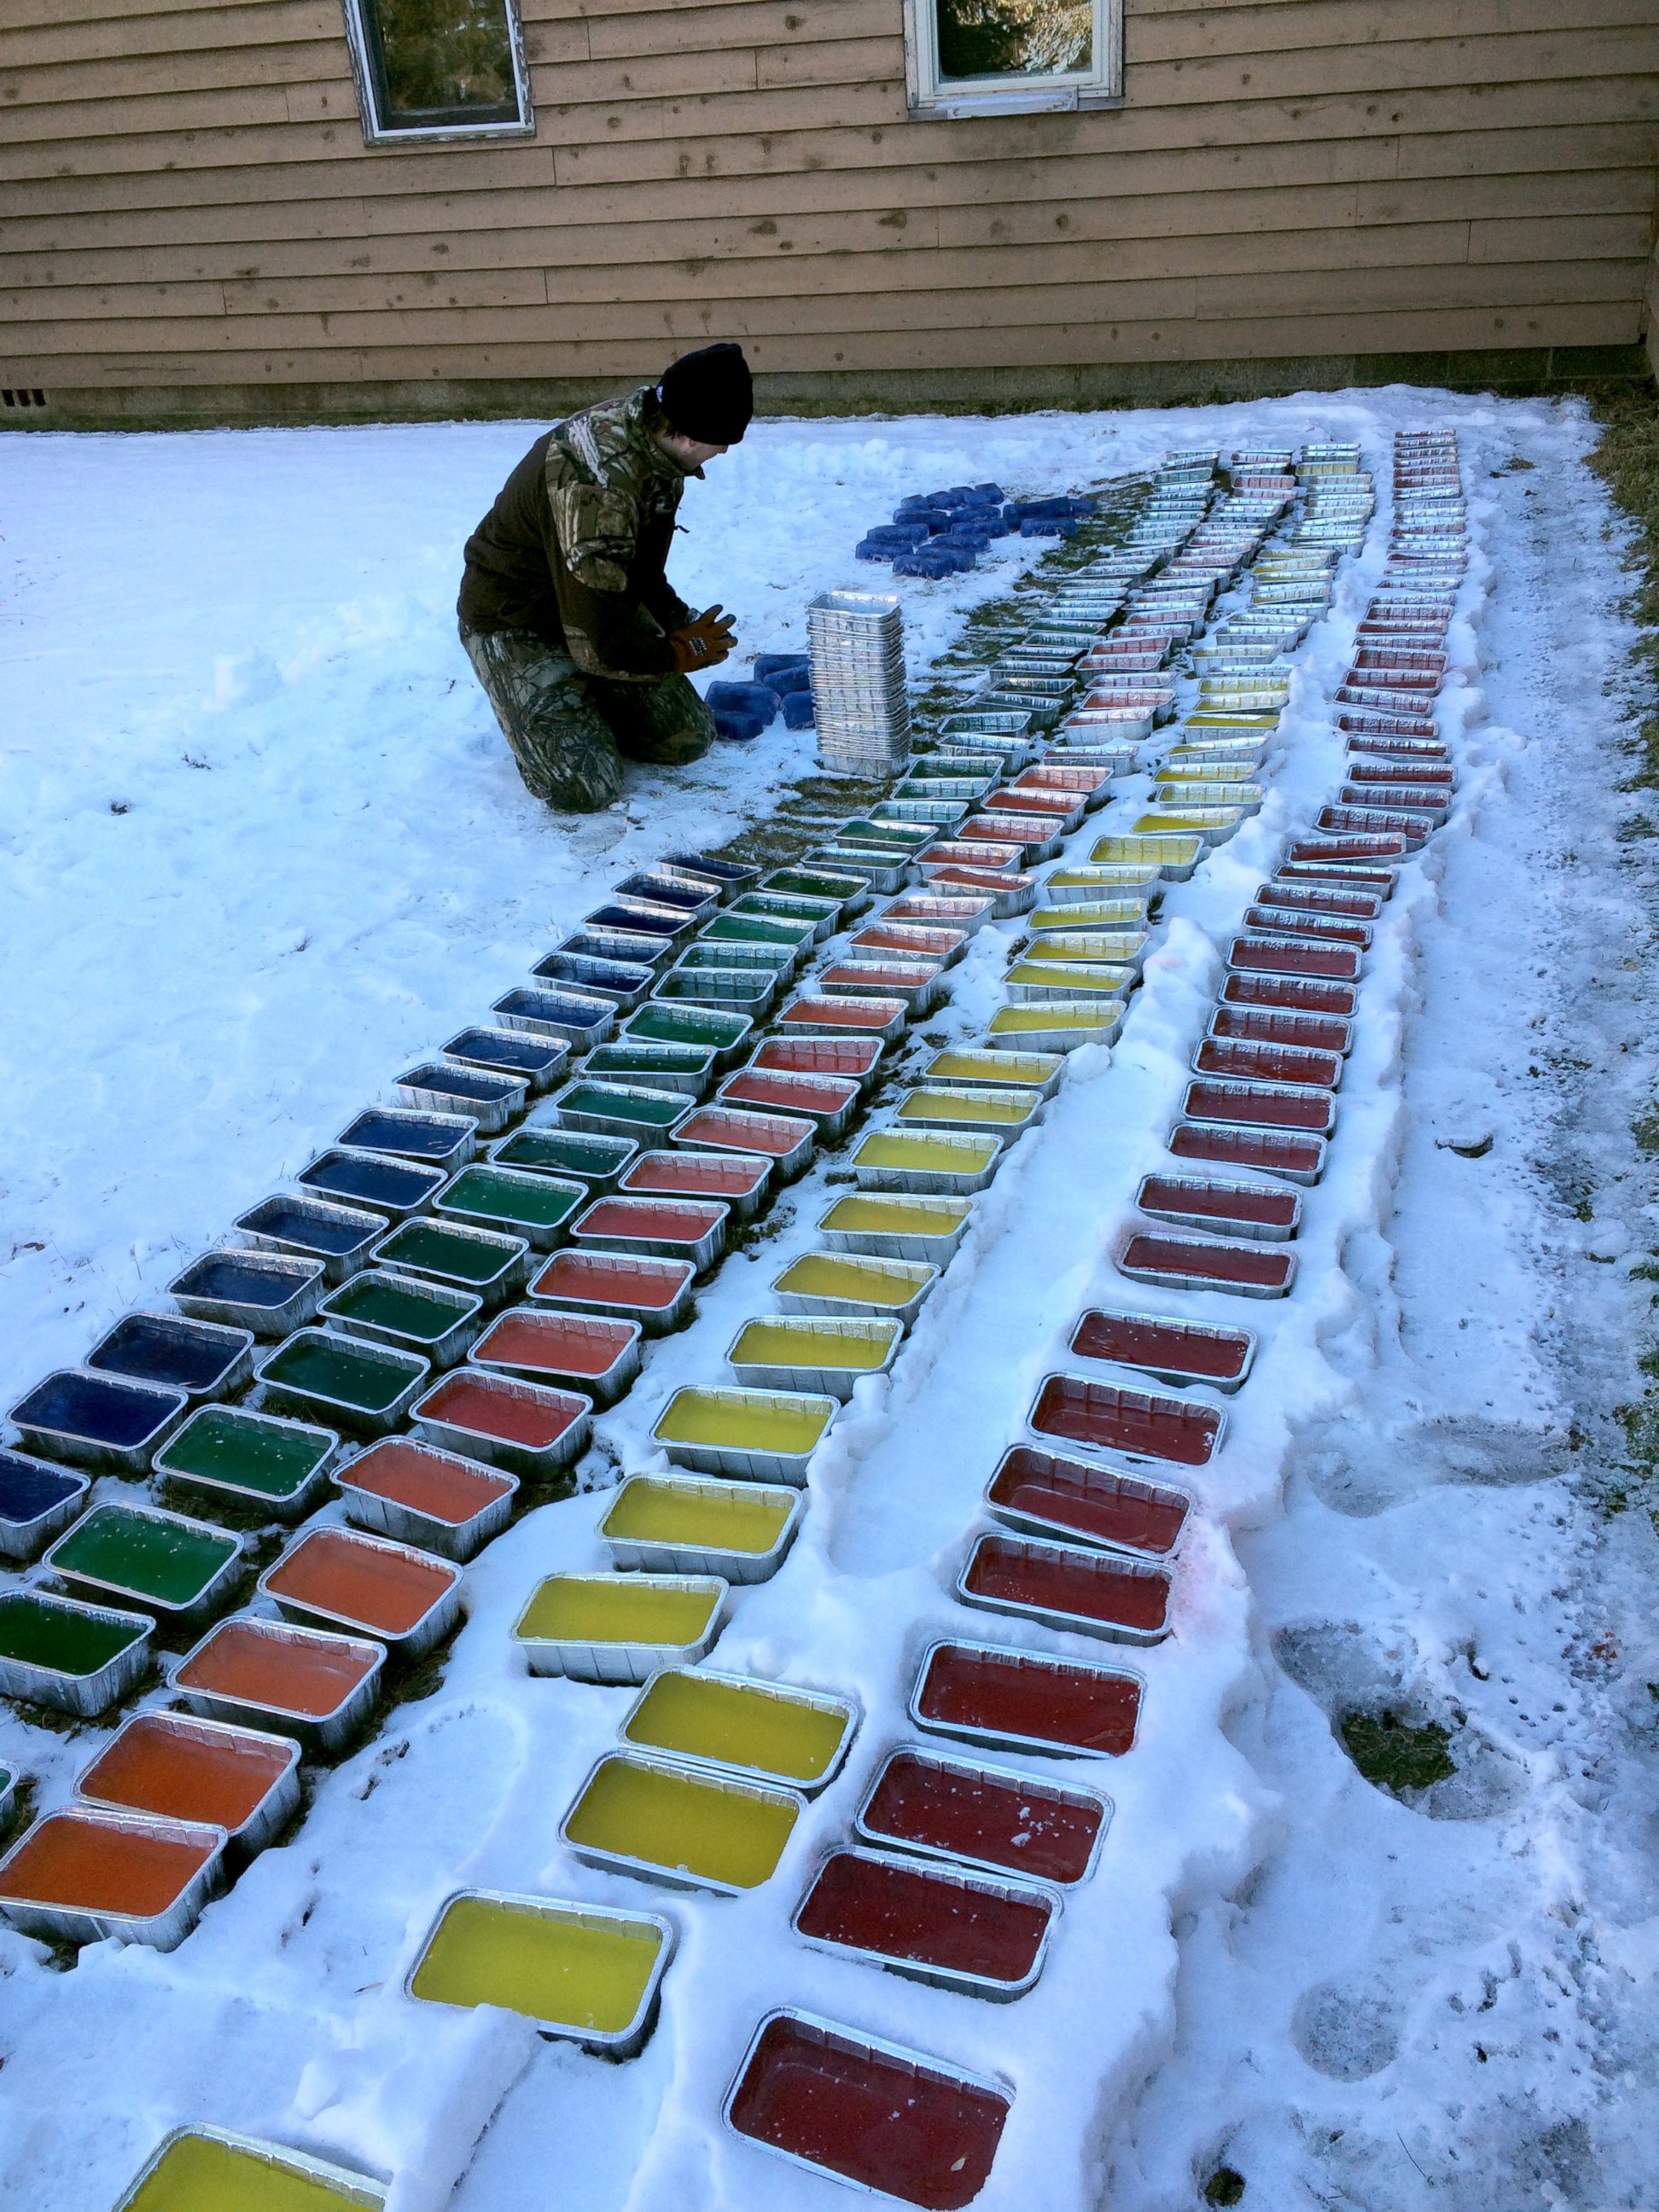 PHOTO: Mitch Fritz pops frozen water "building blocks" out of bread tins. Fritz used 500 blocks to build an igloo on the St. John's University campus in Collegeville, Minn.